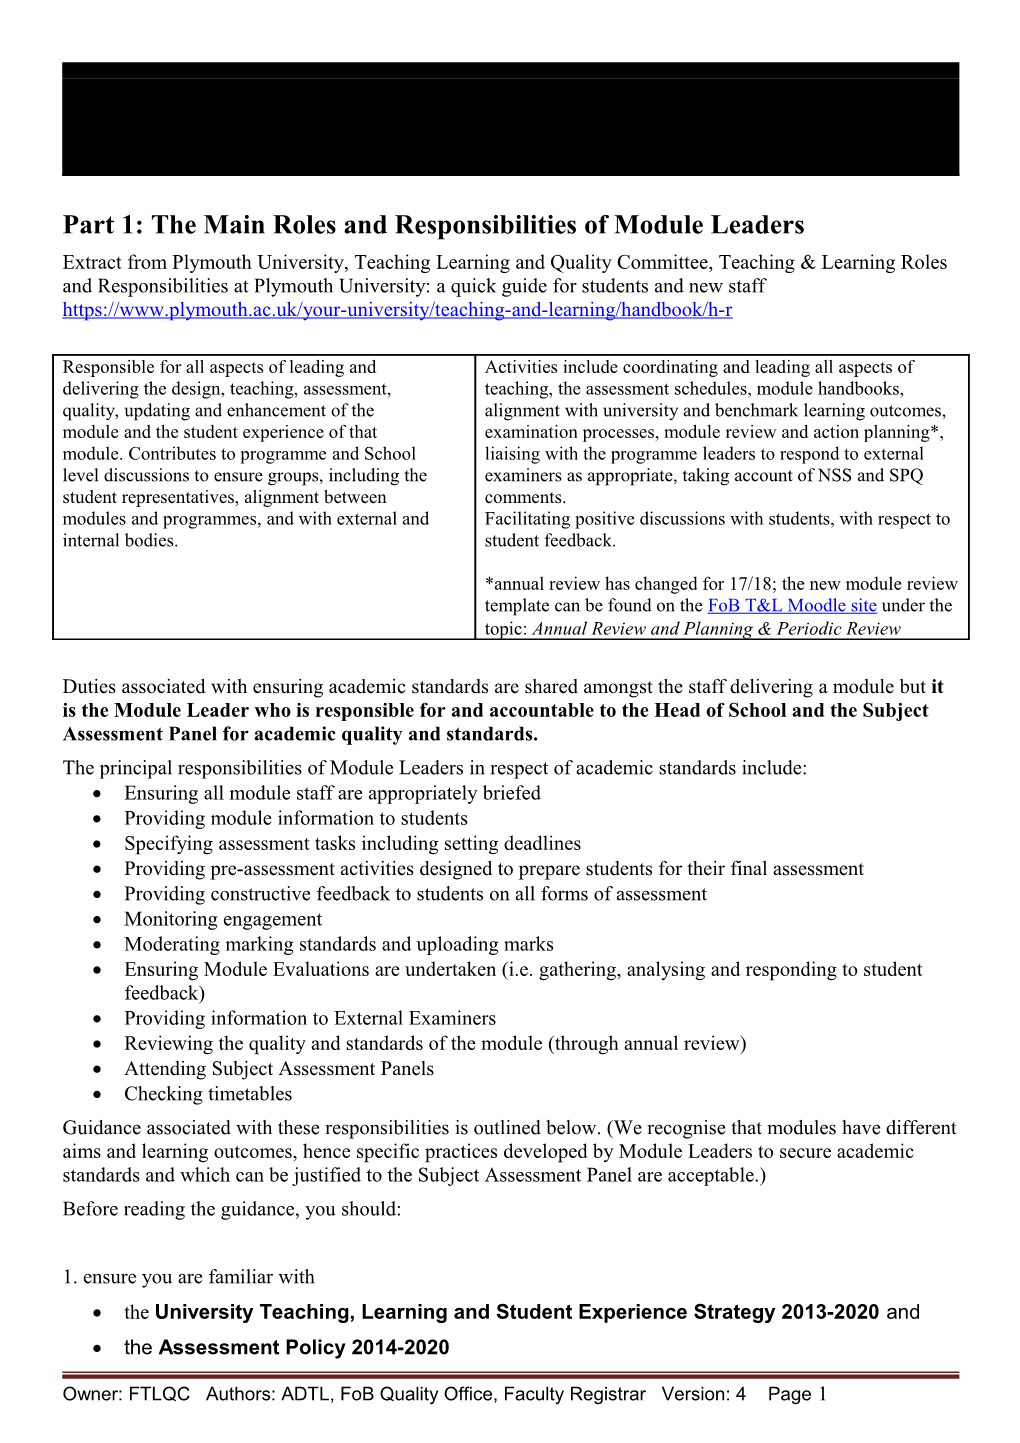 Part 1: the Main Roles and Responsibilities of Module Leaders